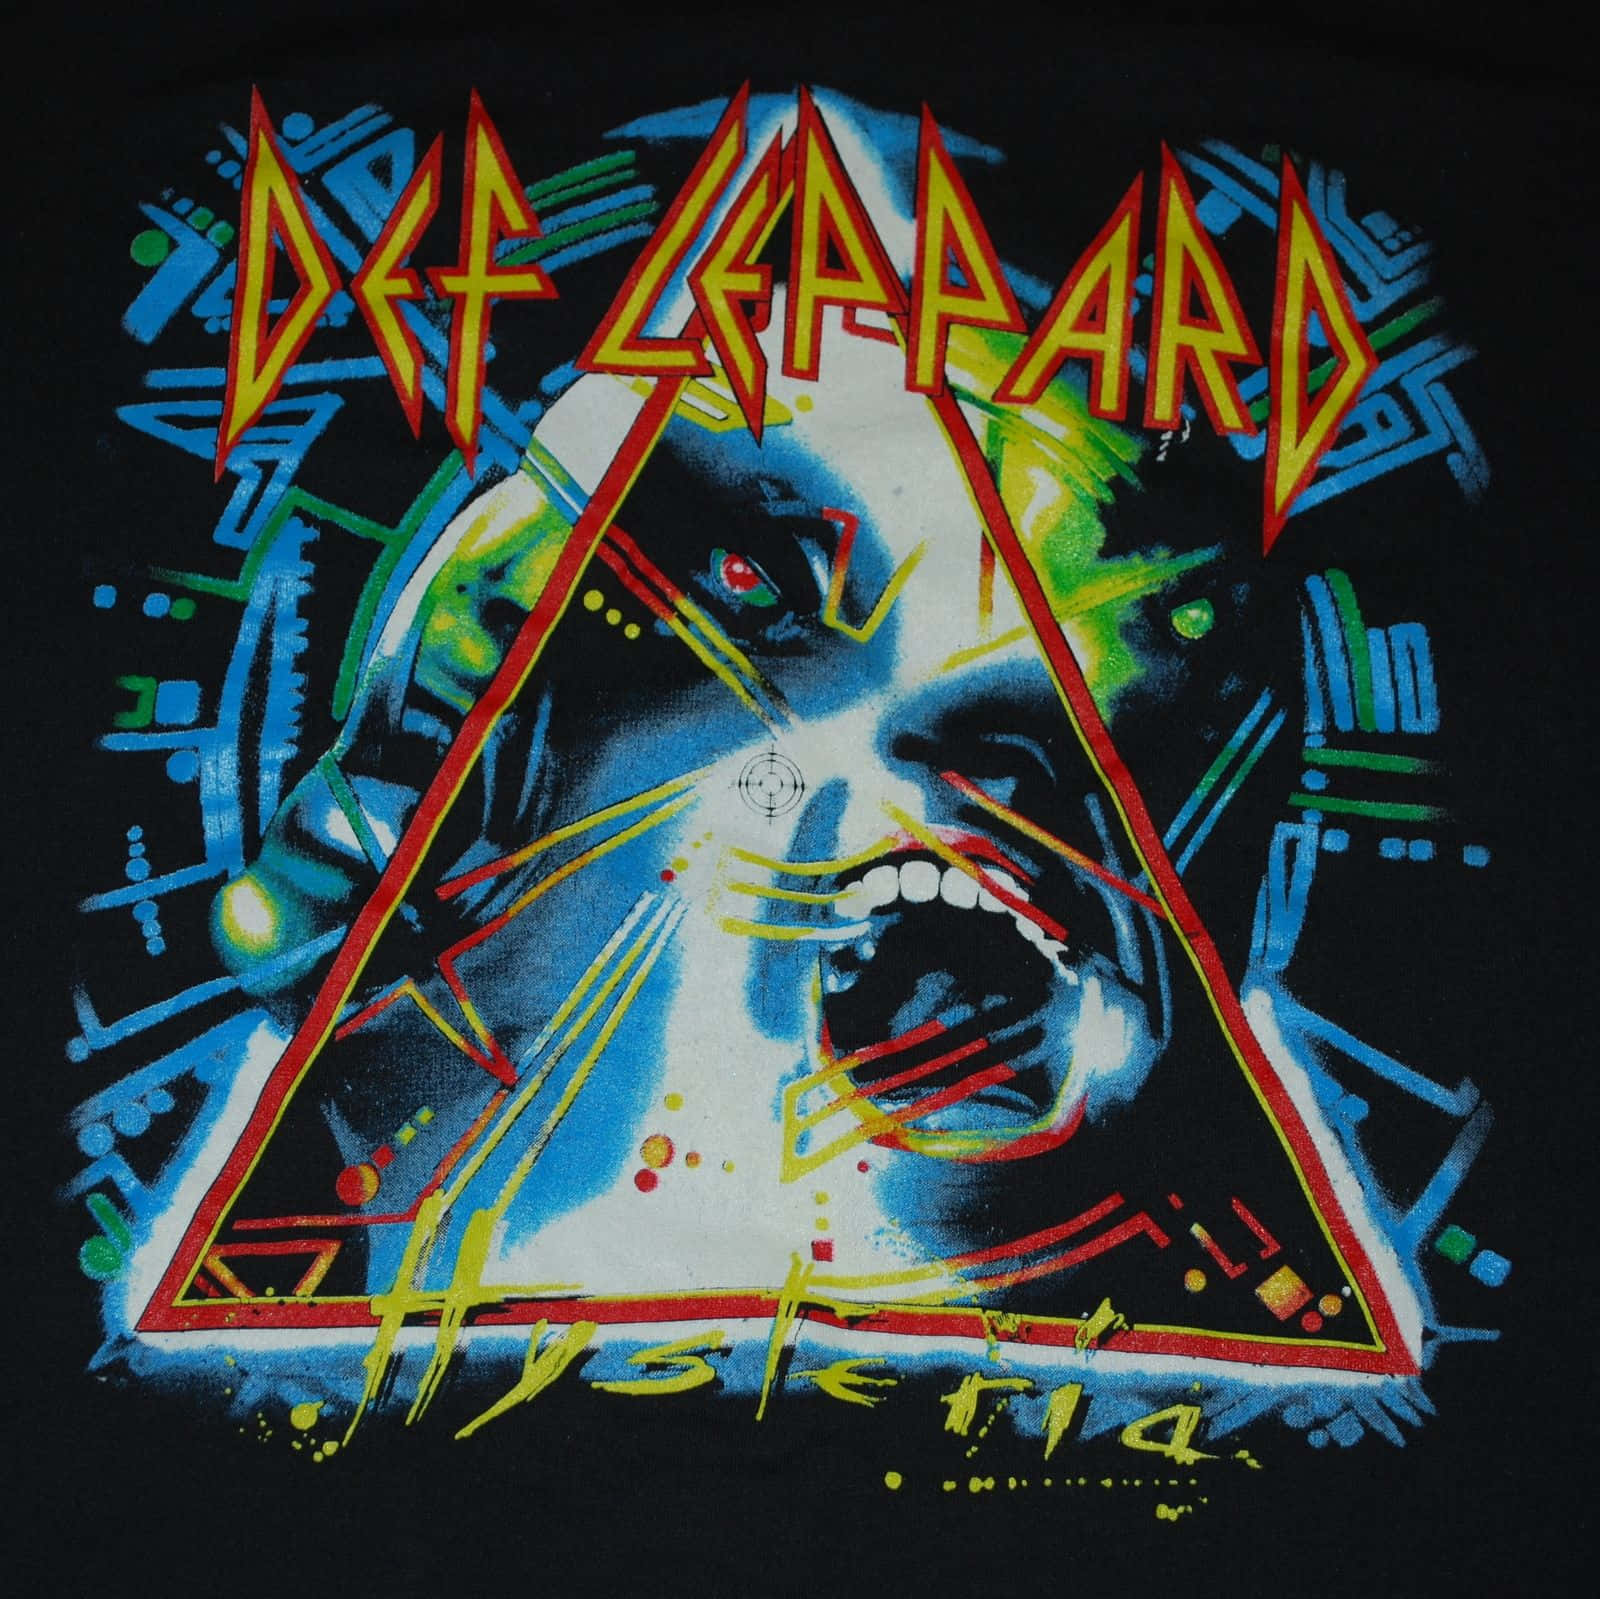 Hysterical Album From Def Leppard Wallpaper